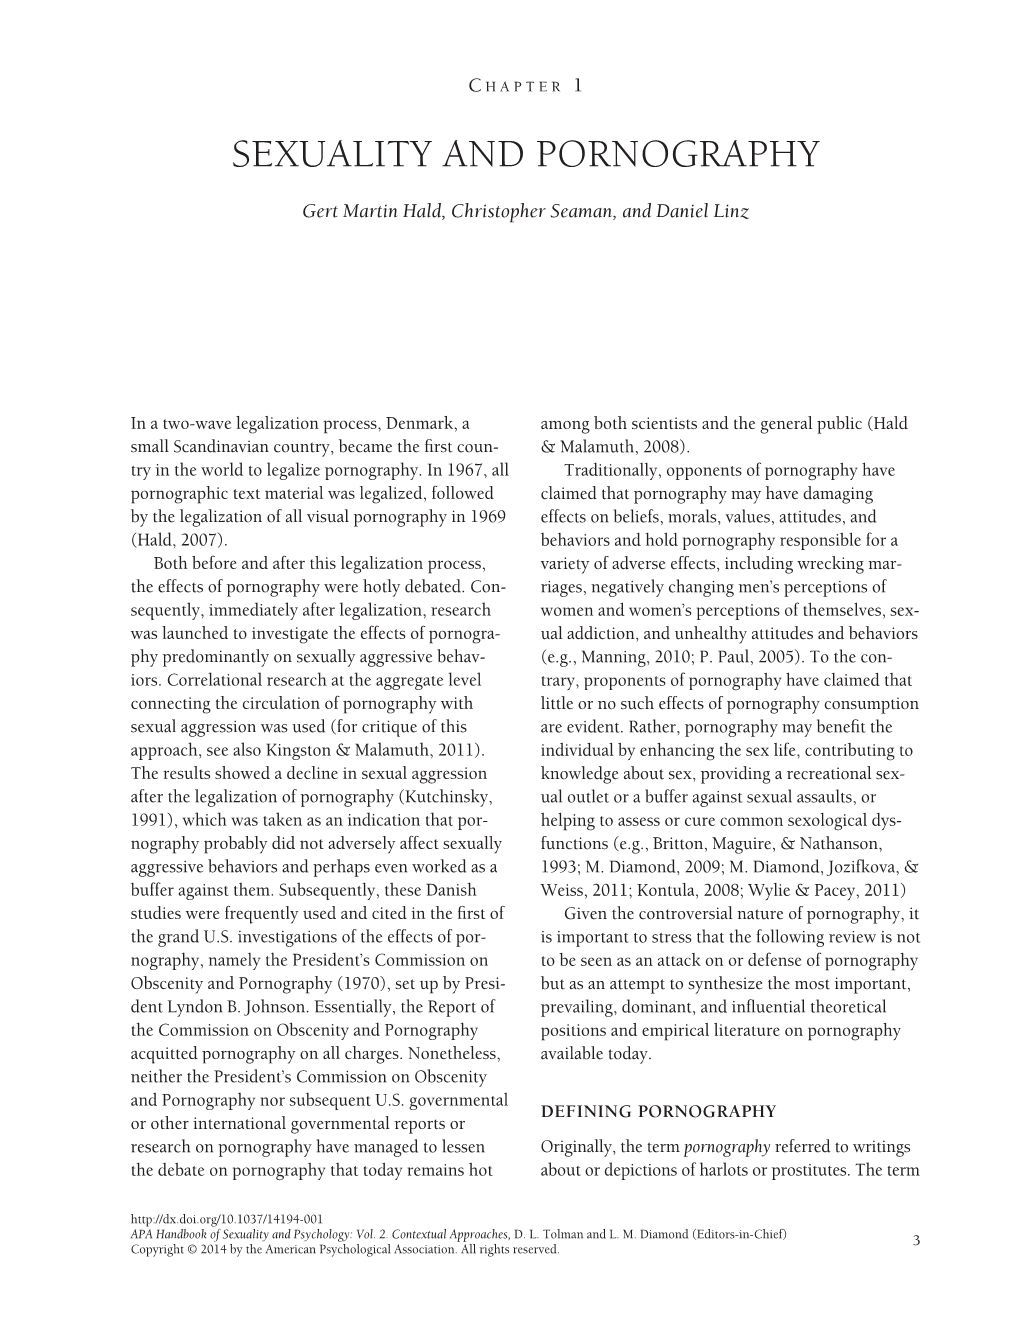 Sexuality and Pornography